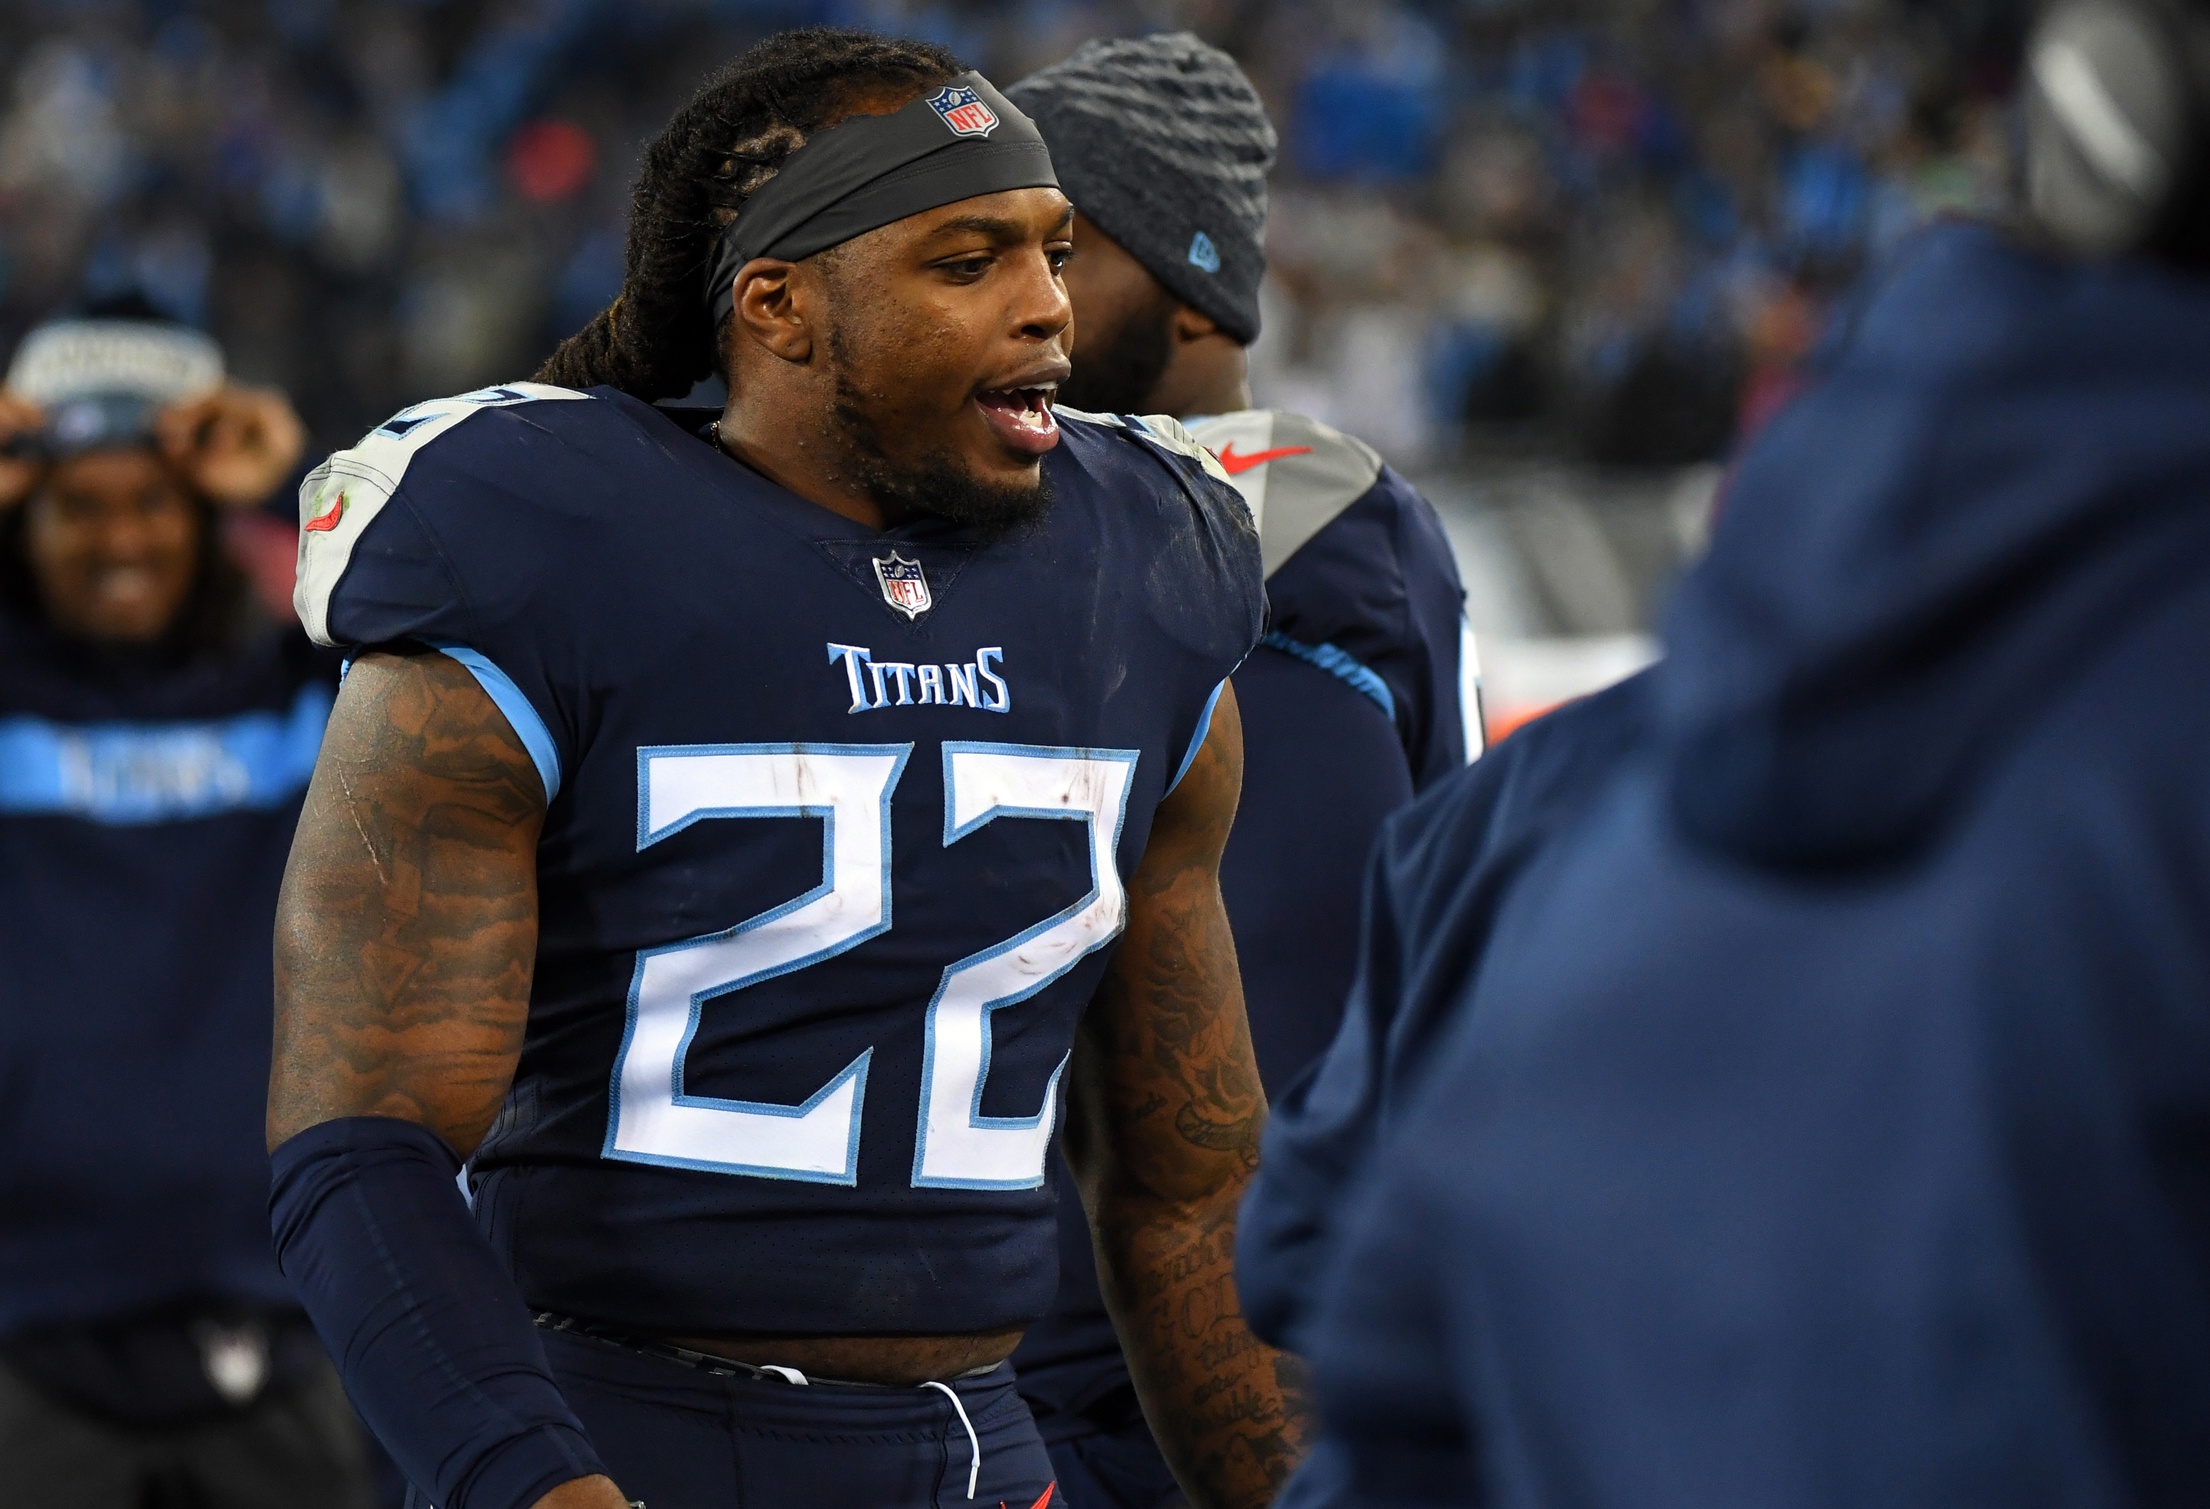 Twitter reacts to Derrick Henry running wild against the Jaguars